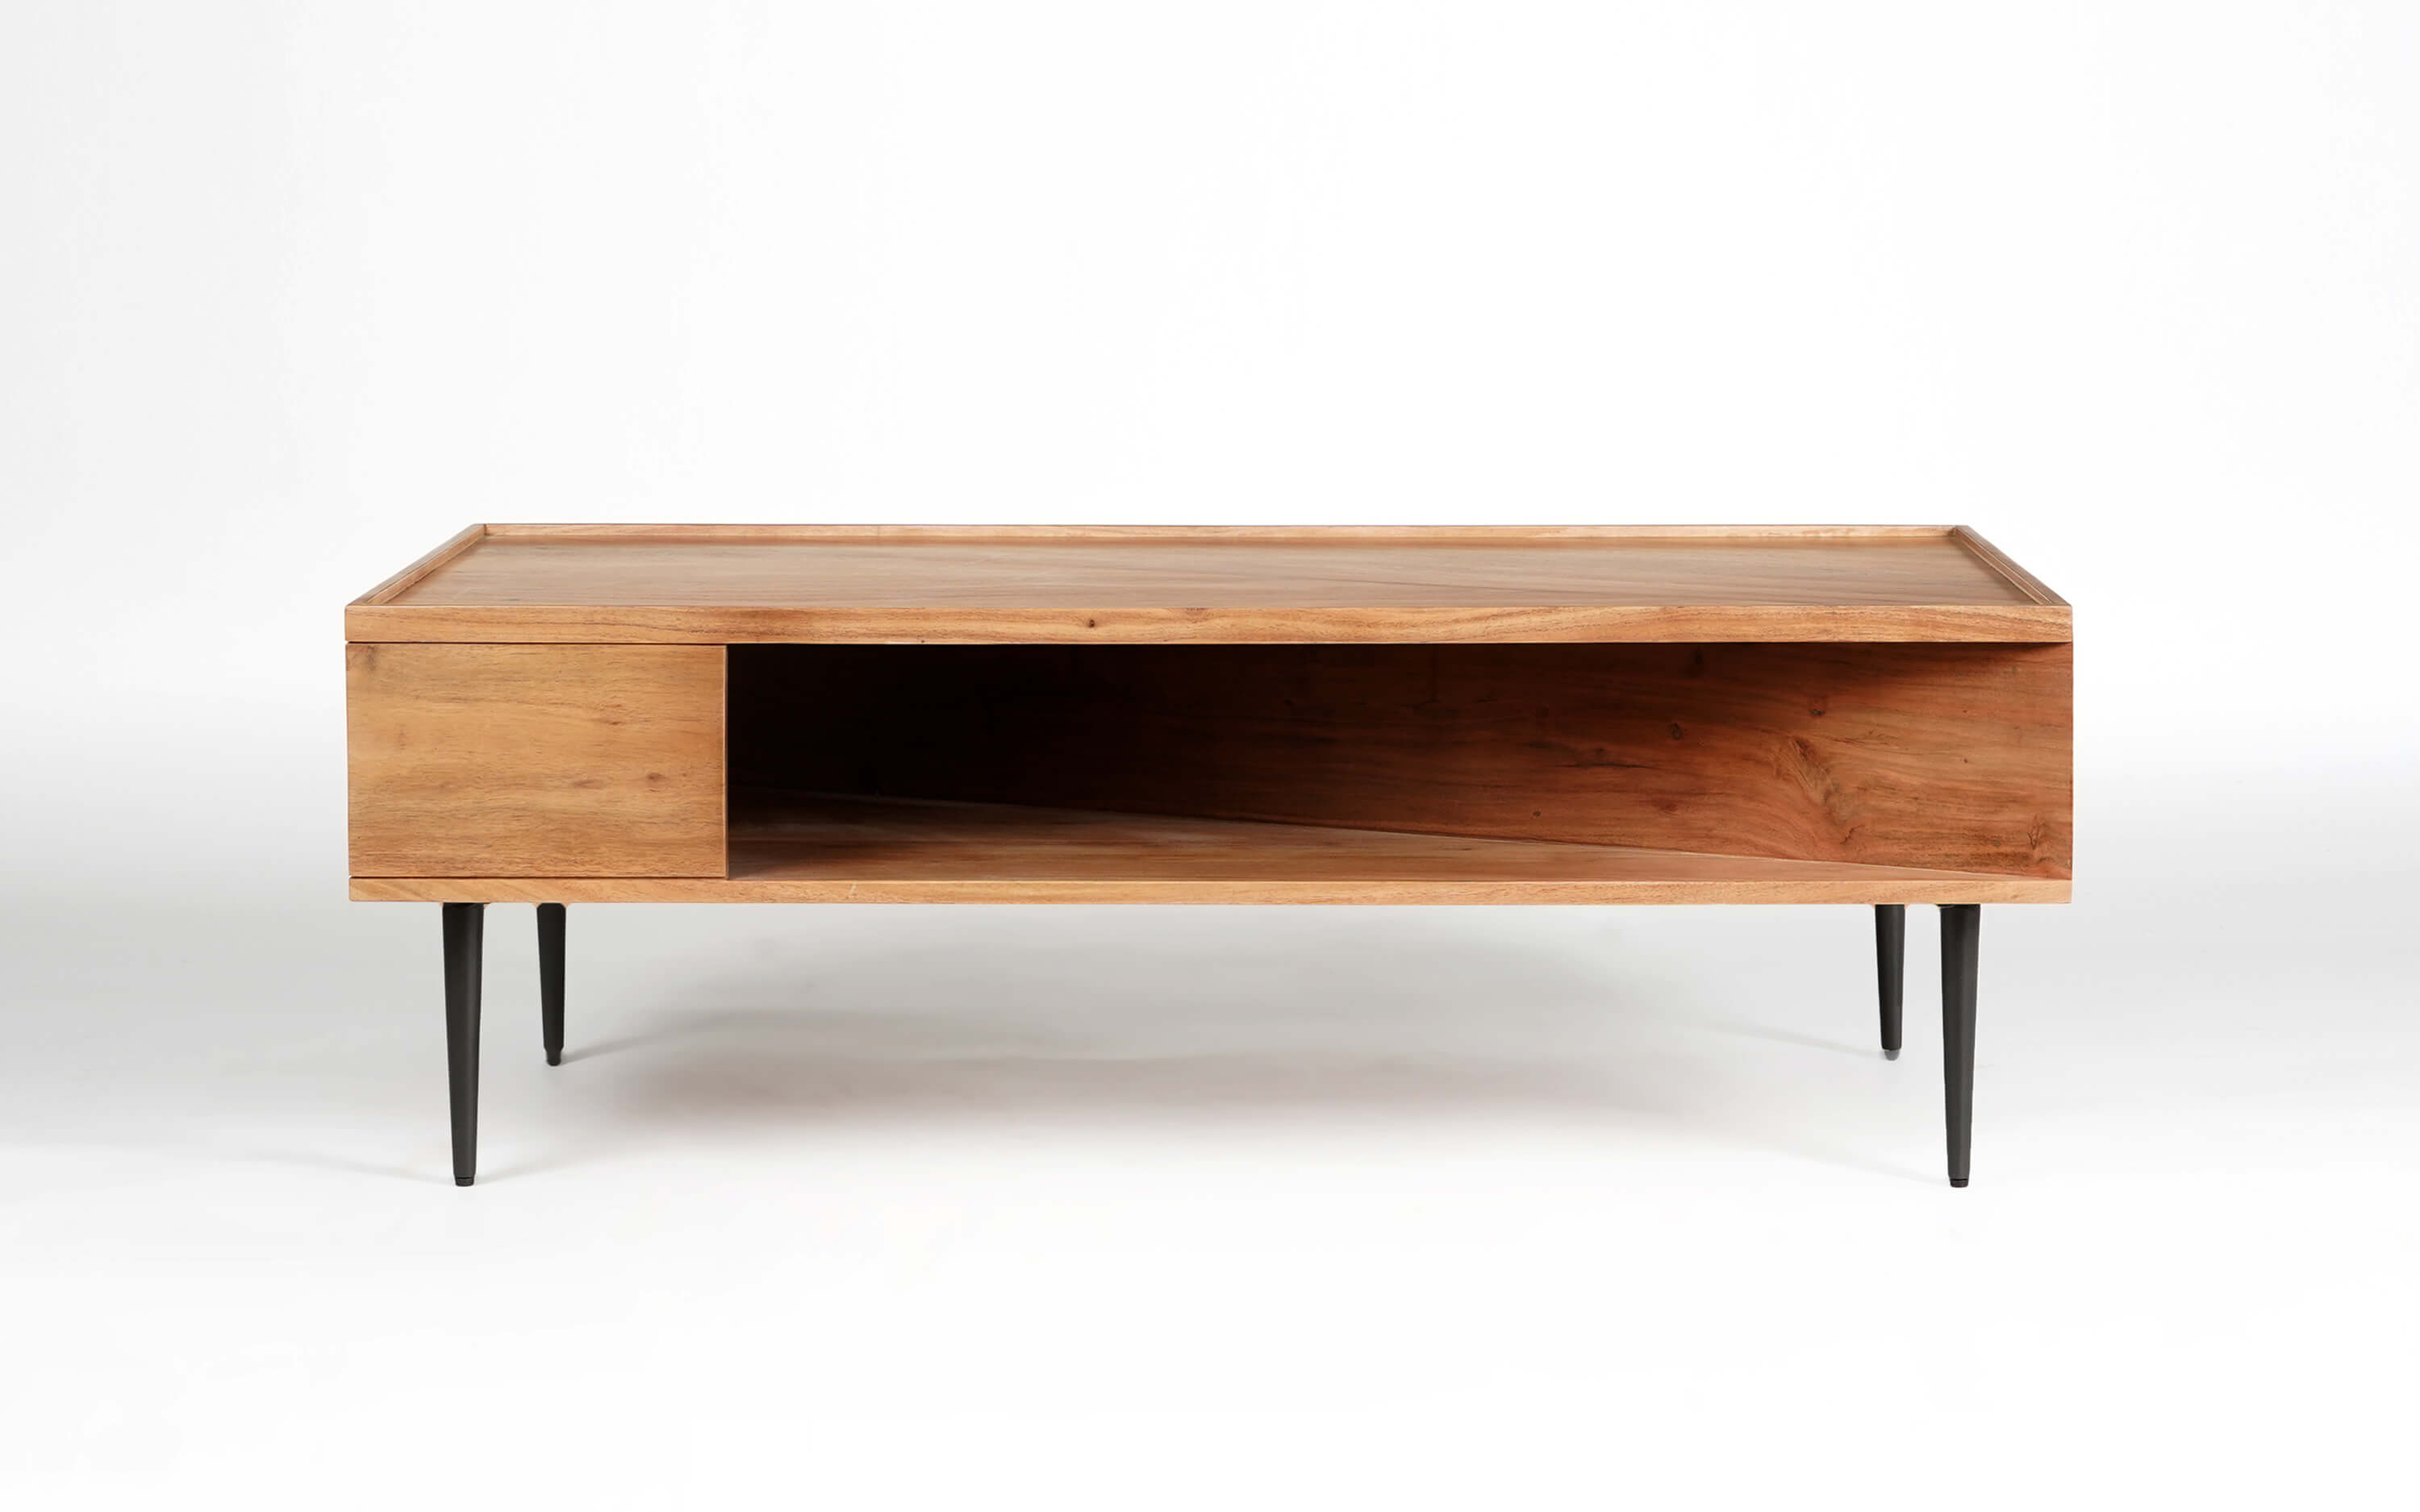 Wooden made coffee table